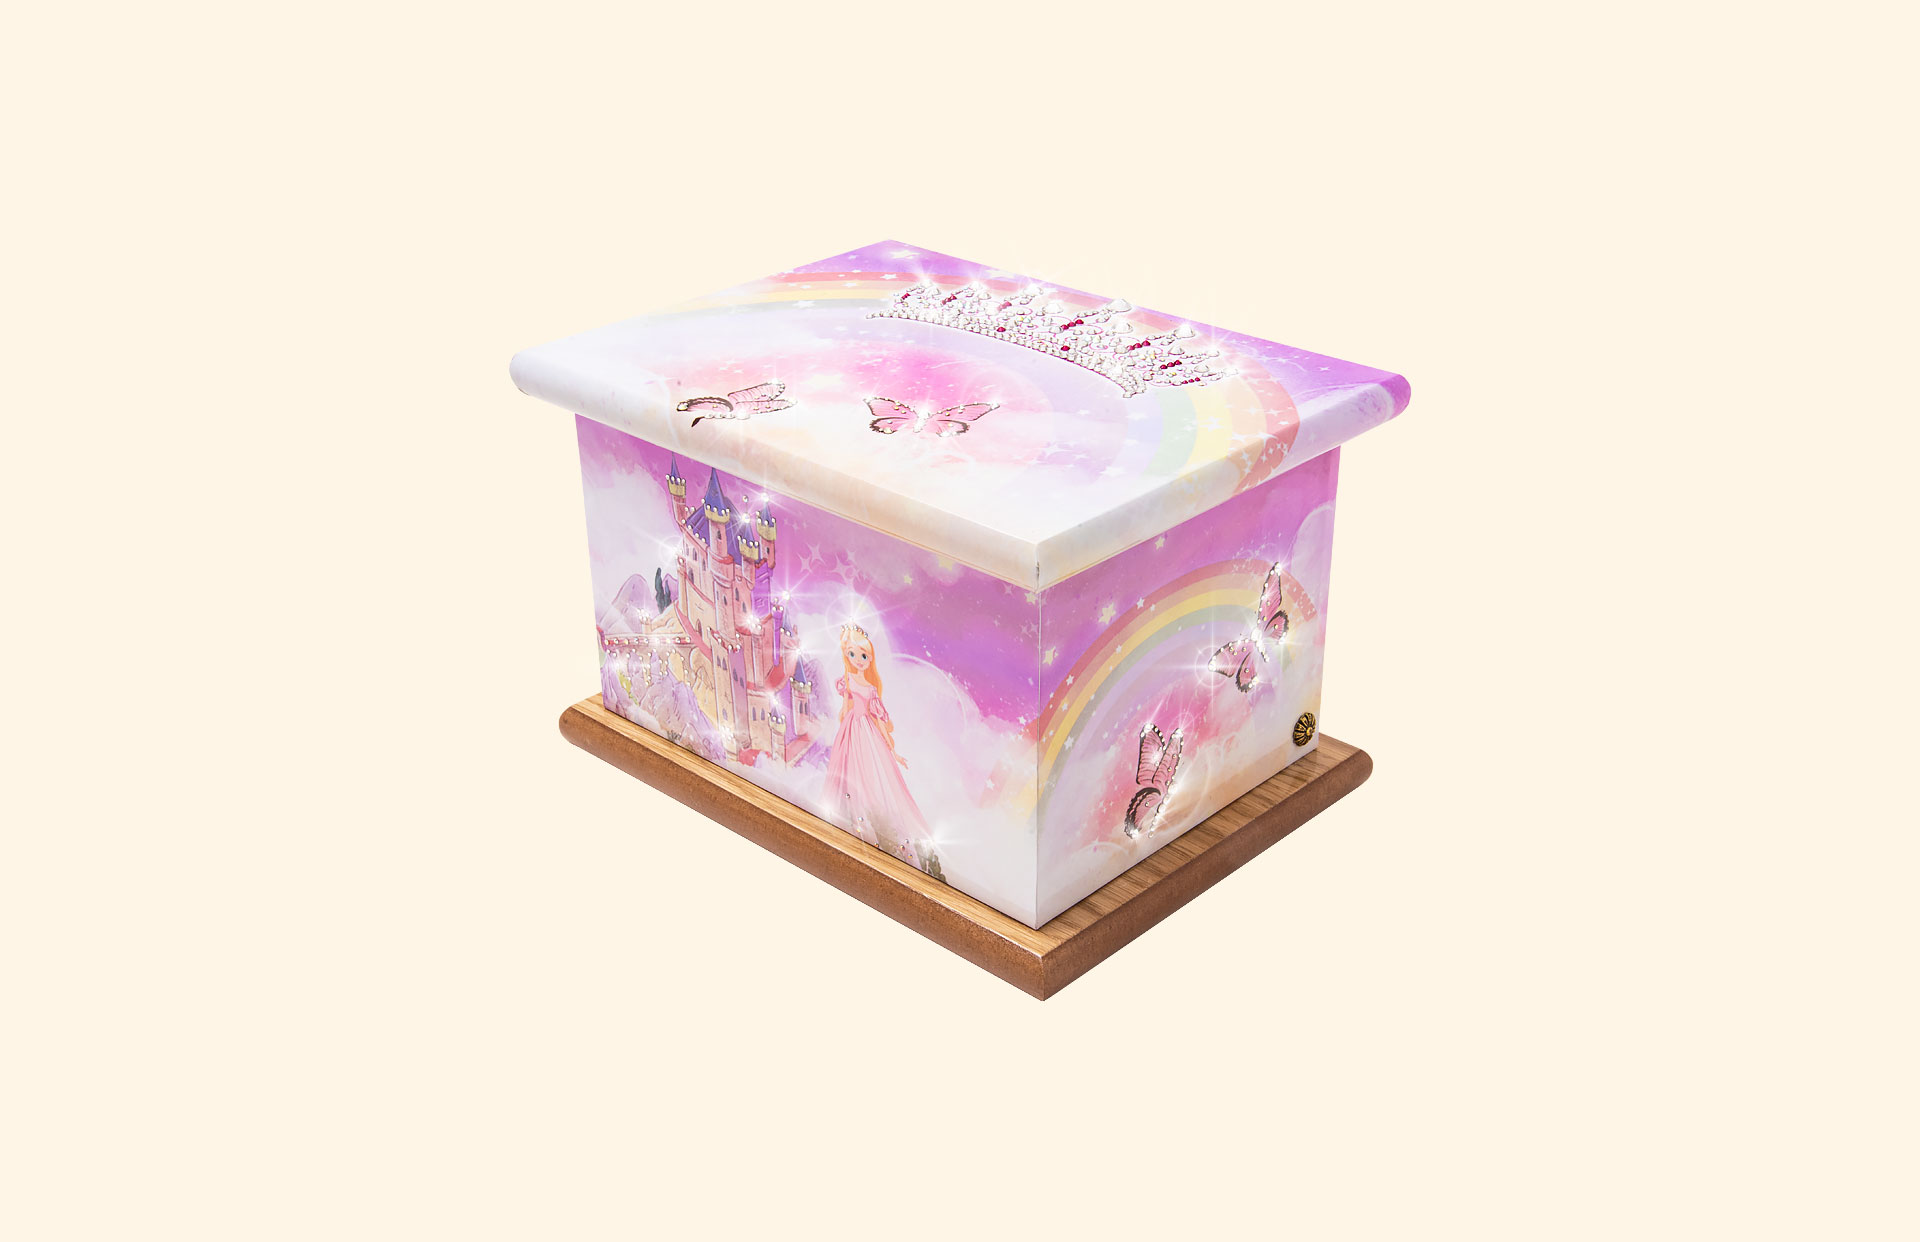 Crystal Our Beautiful Princess child ashes casket